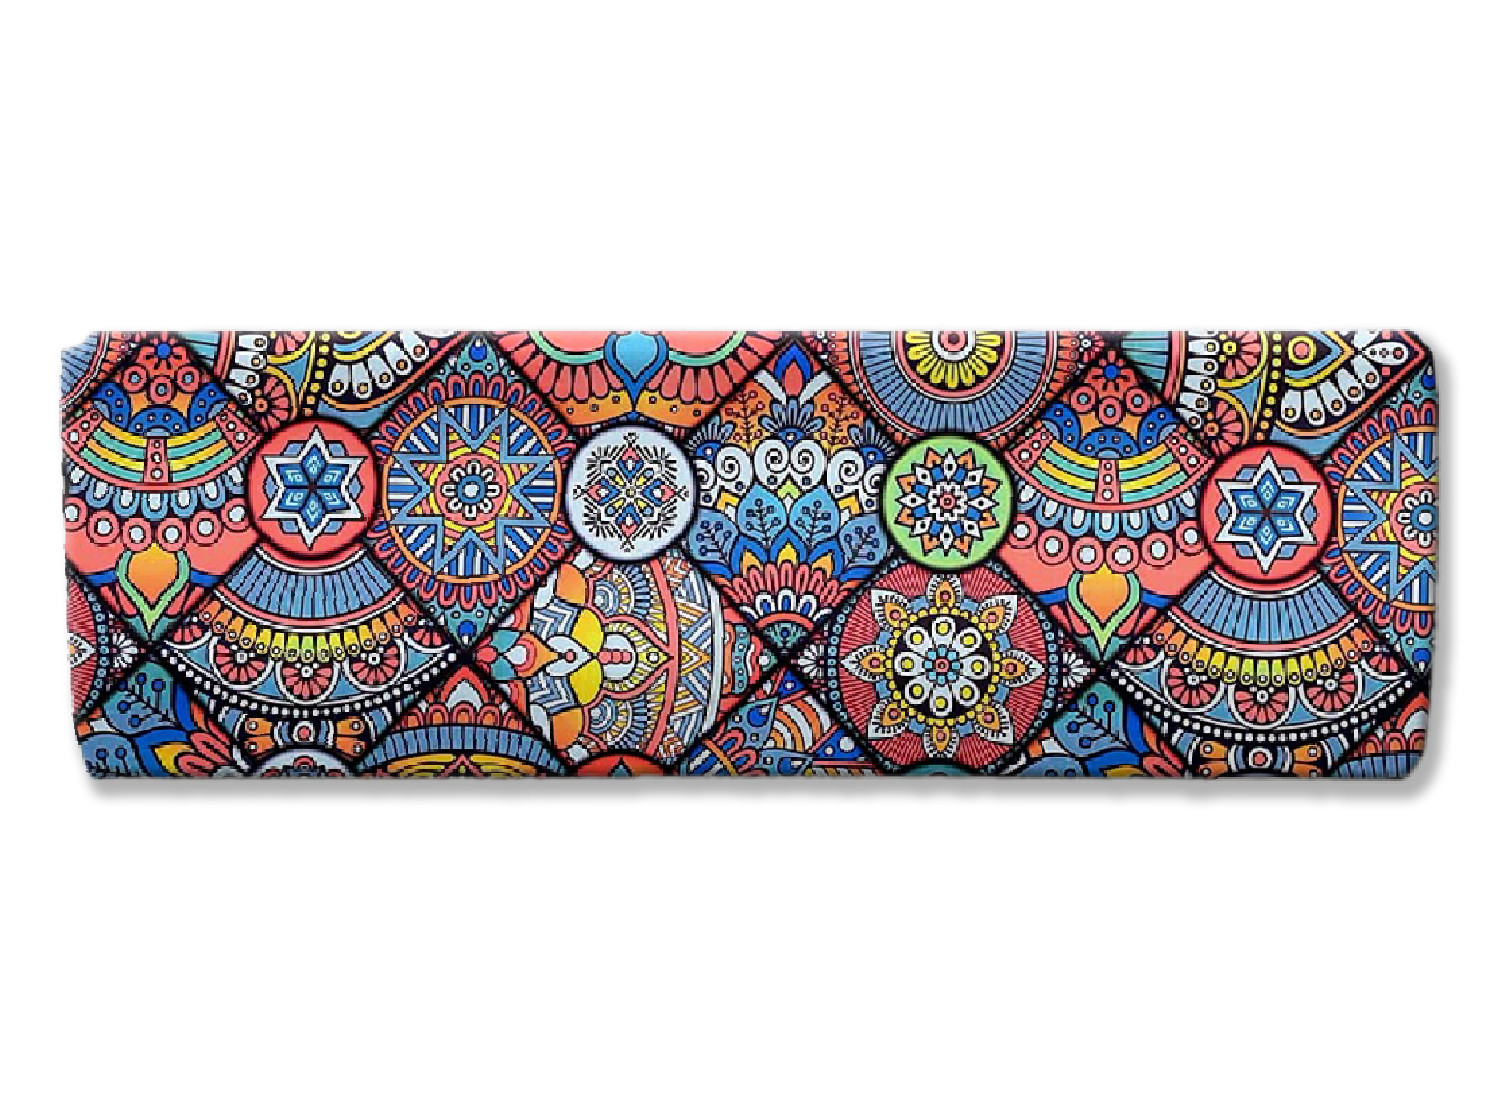 Kuber Industries AC Cover|Attractive Digital Print 1.5 Ton |All Weather Friendly|Stretchable Fabric & Elastic Closure, (Multicolor)